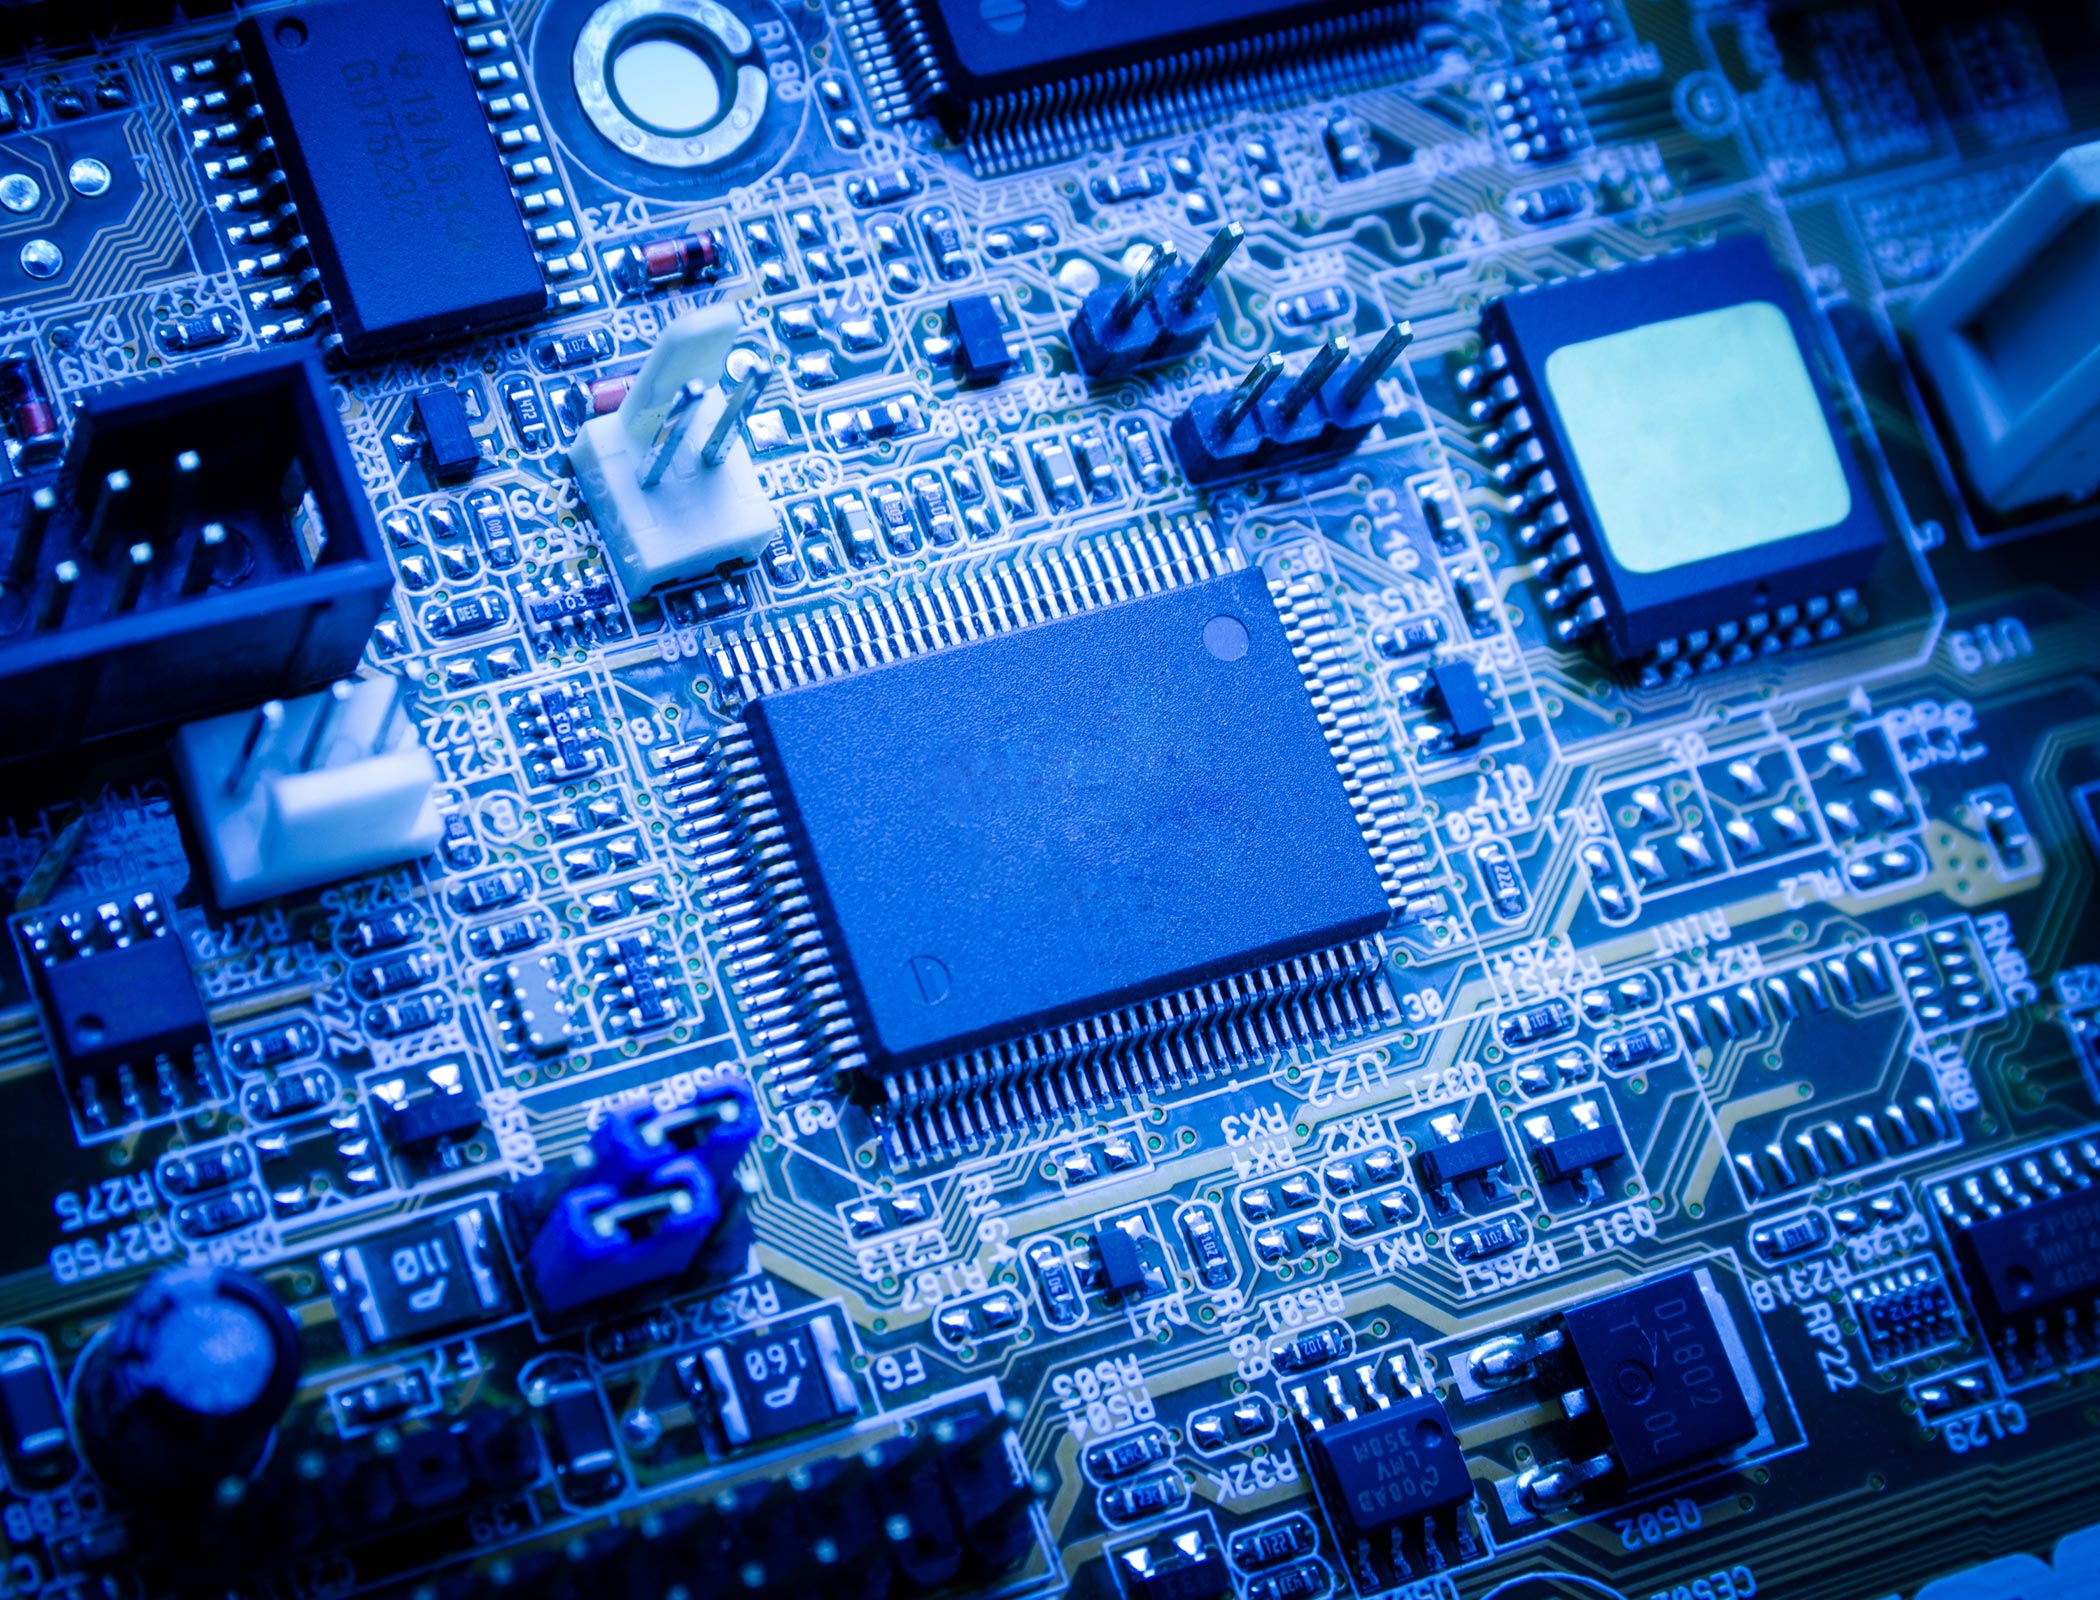 MPs blast UK government over failure to secure semiconductor supply chain